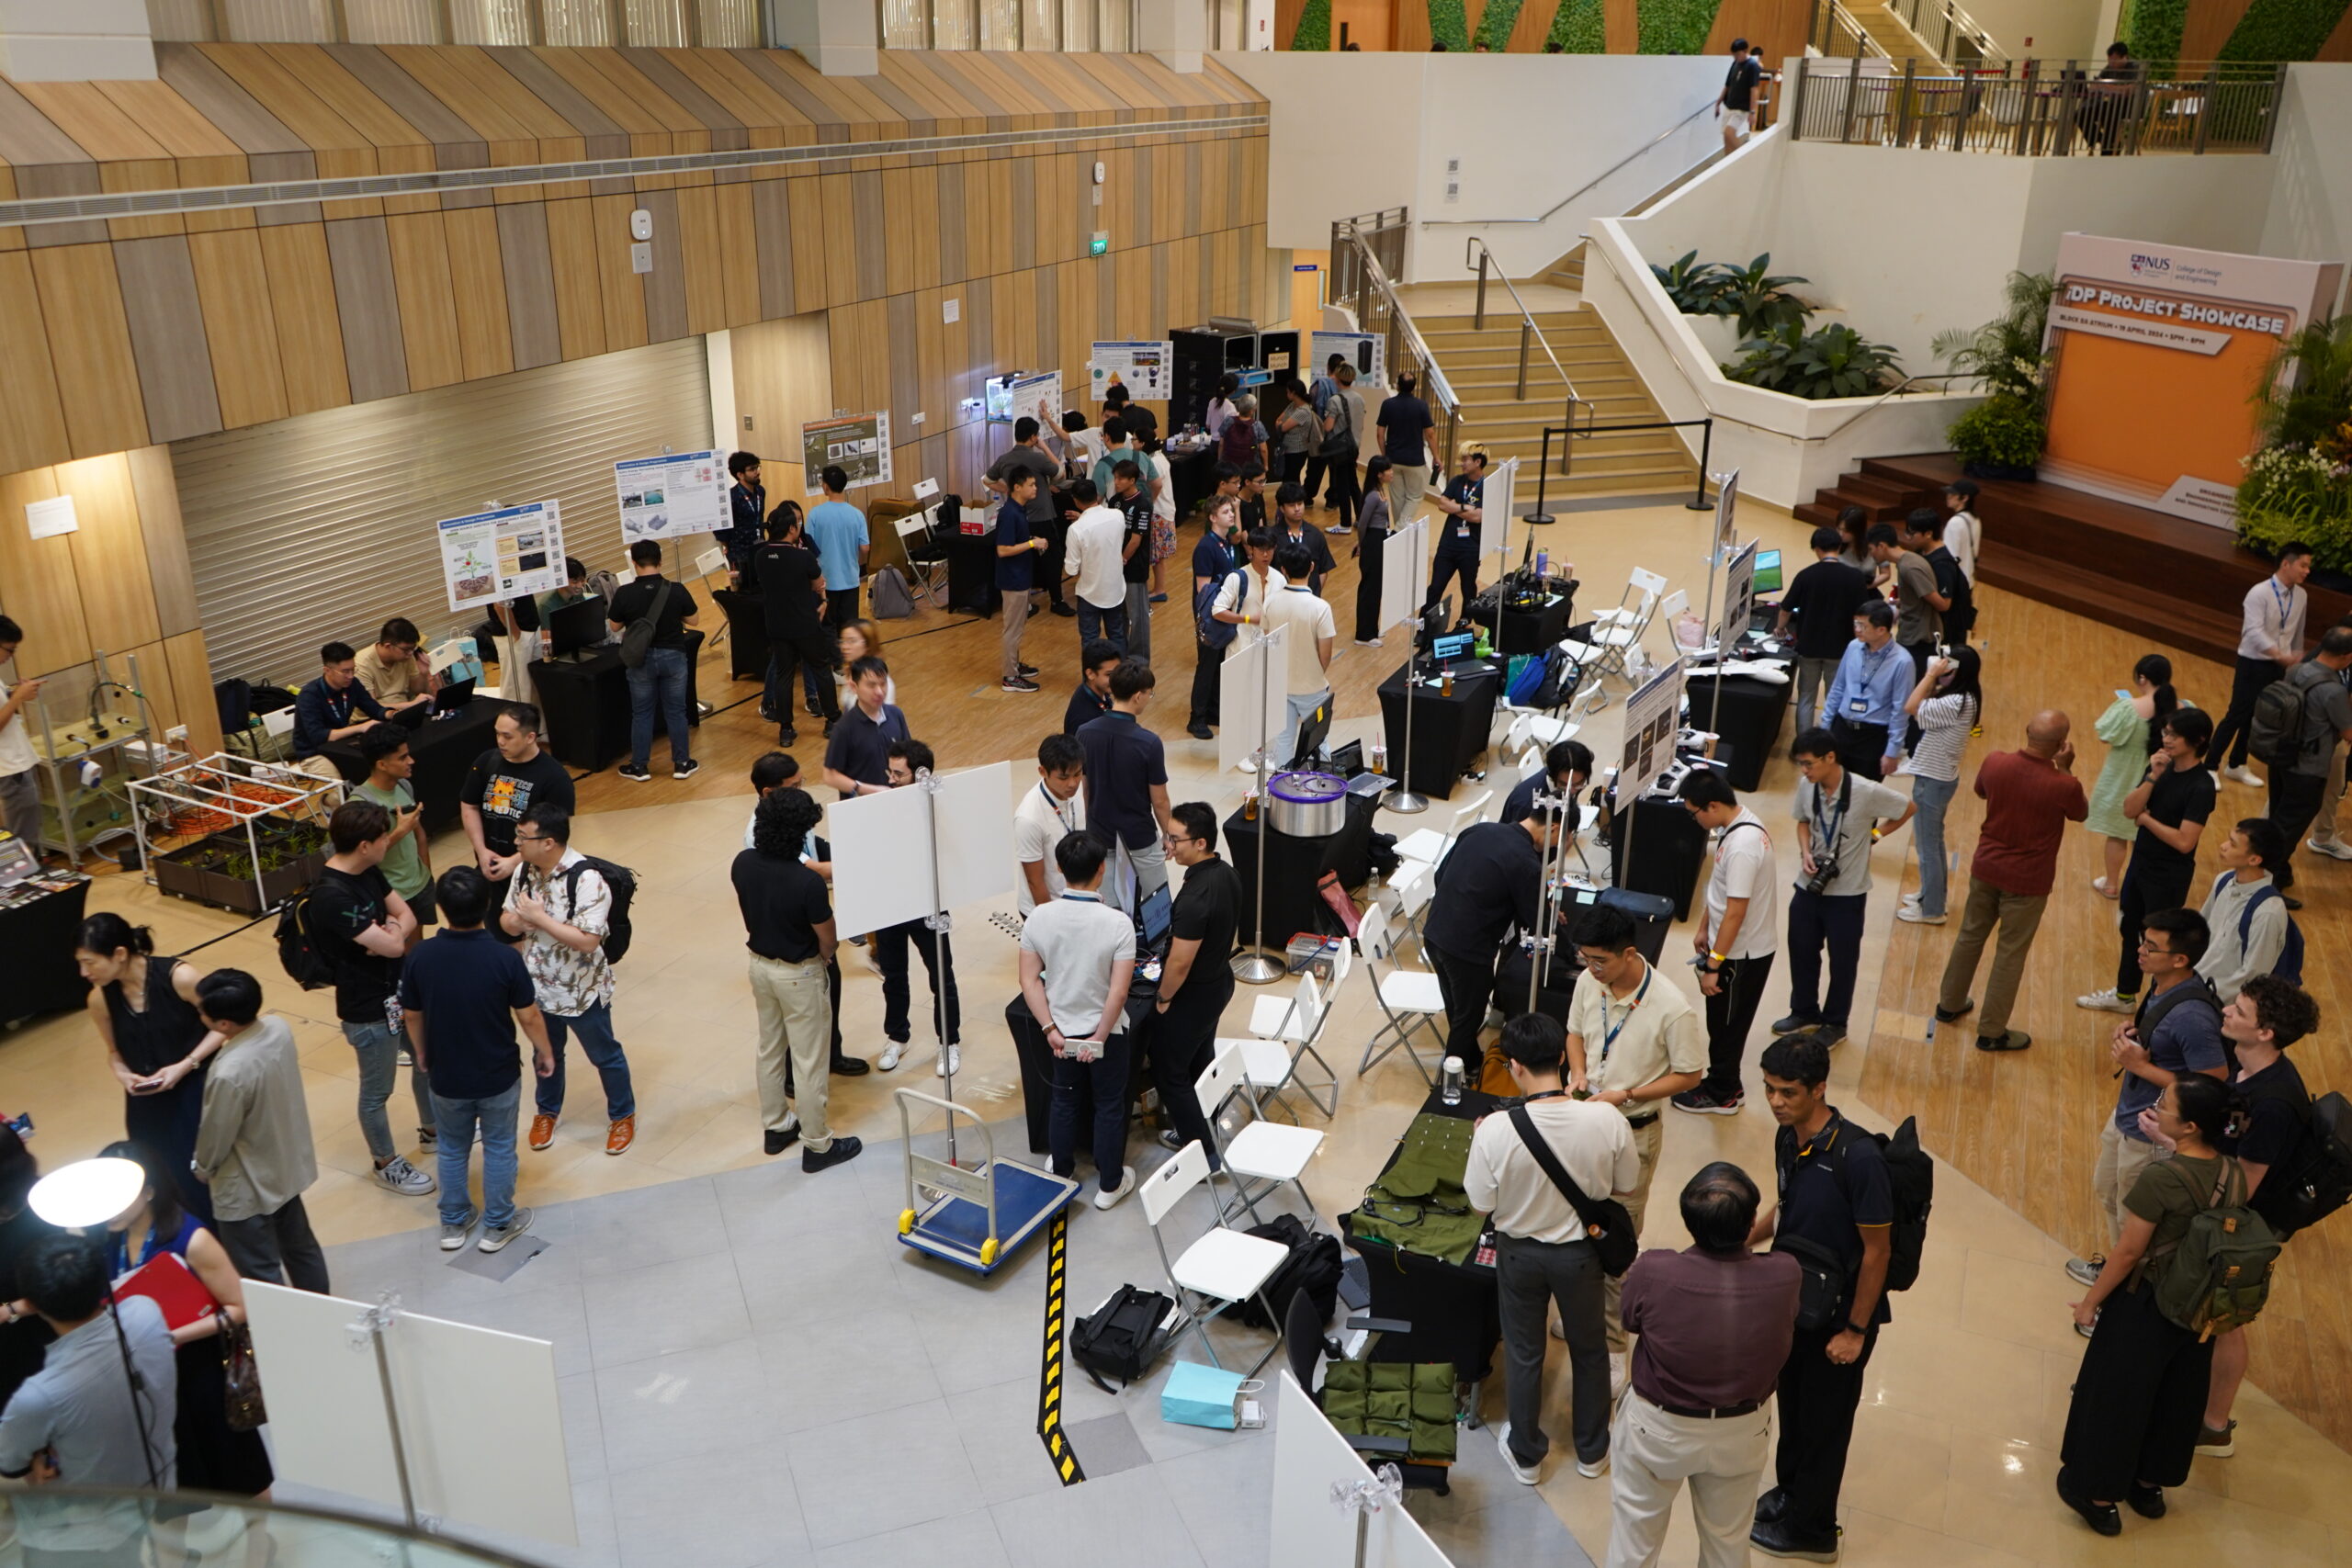 The booths were crowded throughout the evening, with many interested in learning about the various student projects.